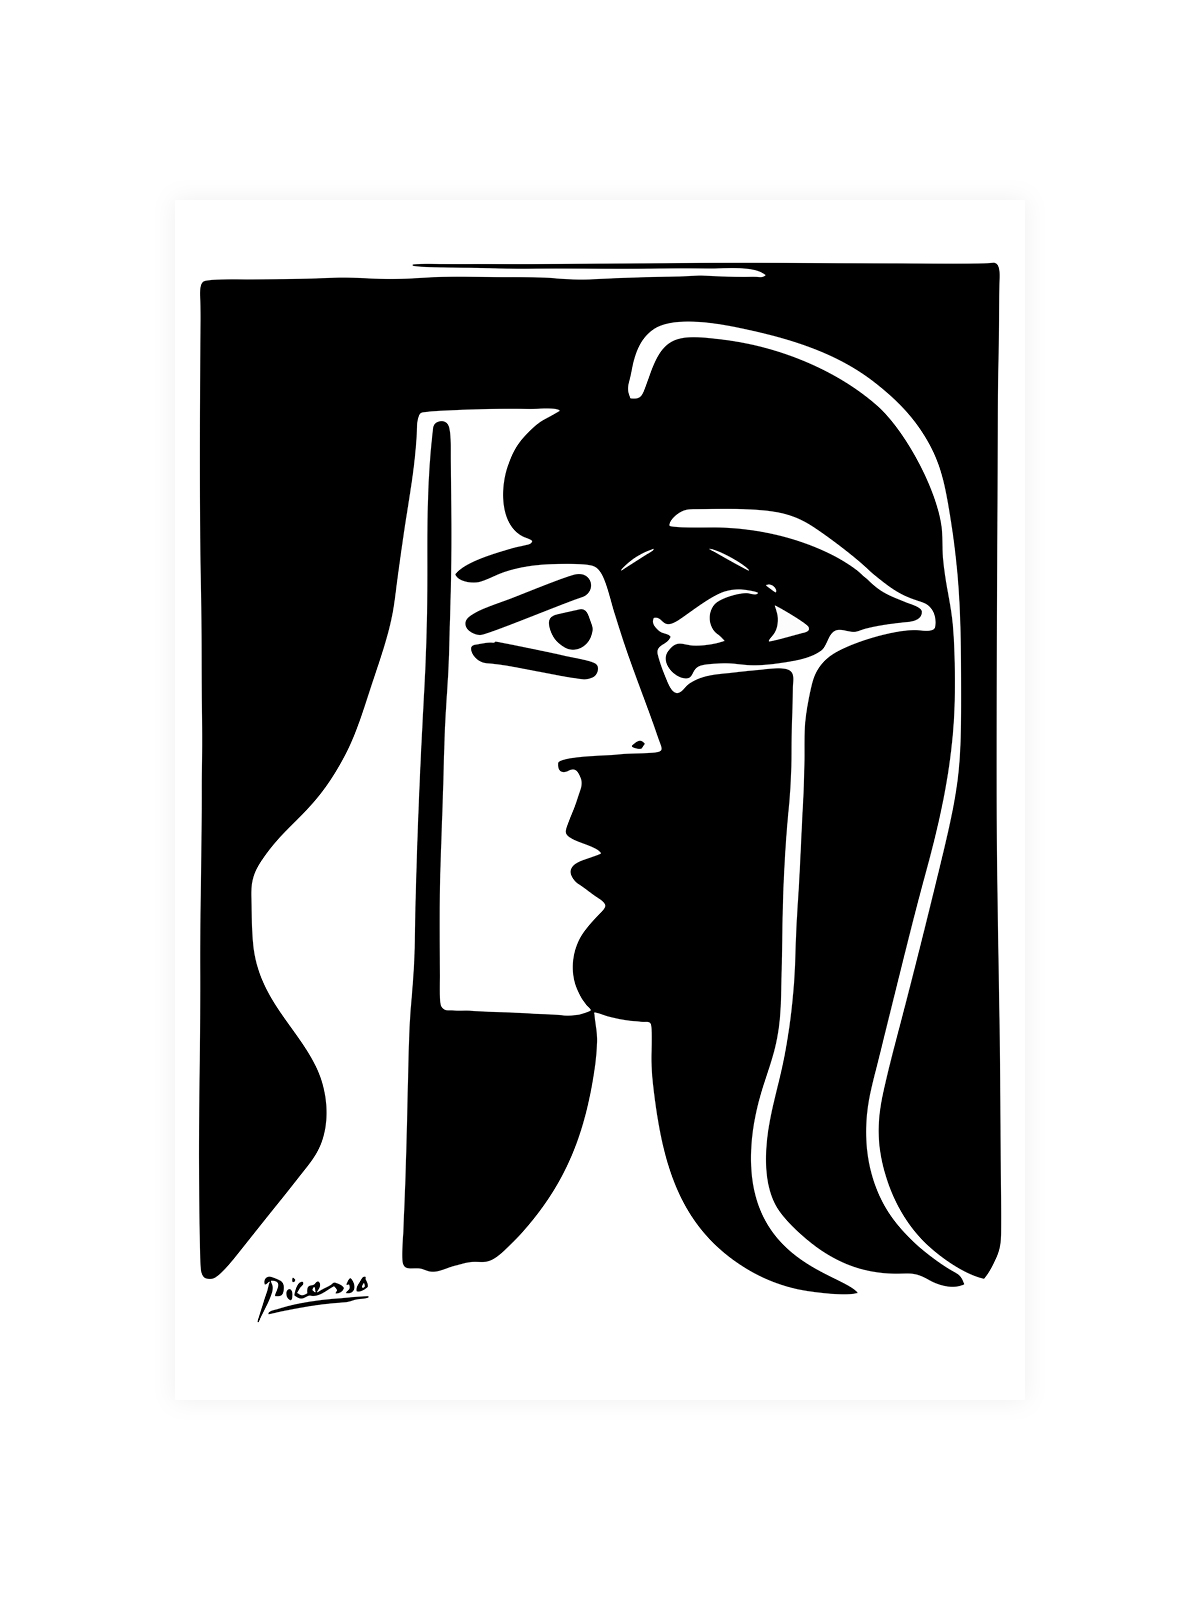 Picasso Black Poster